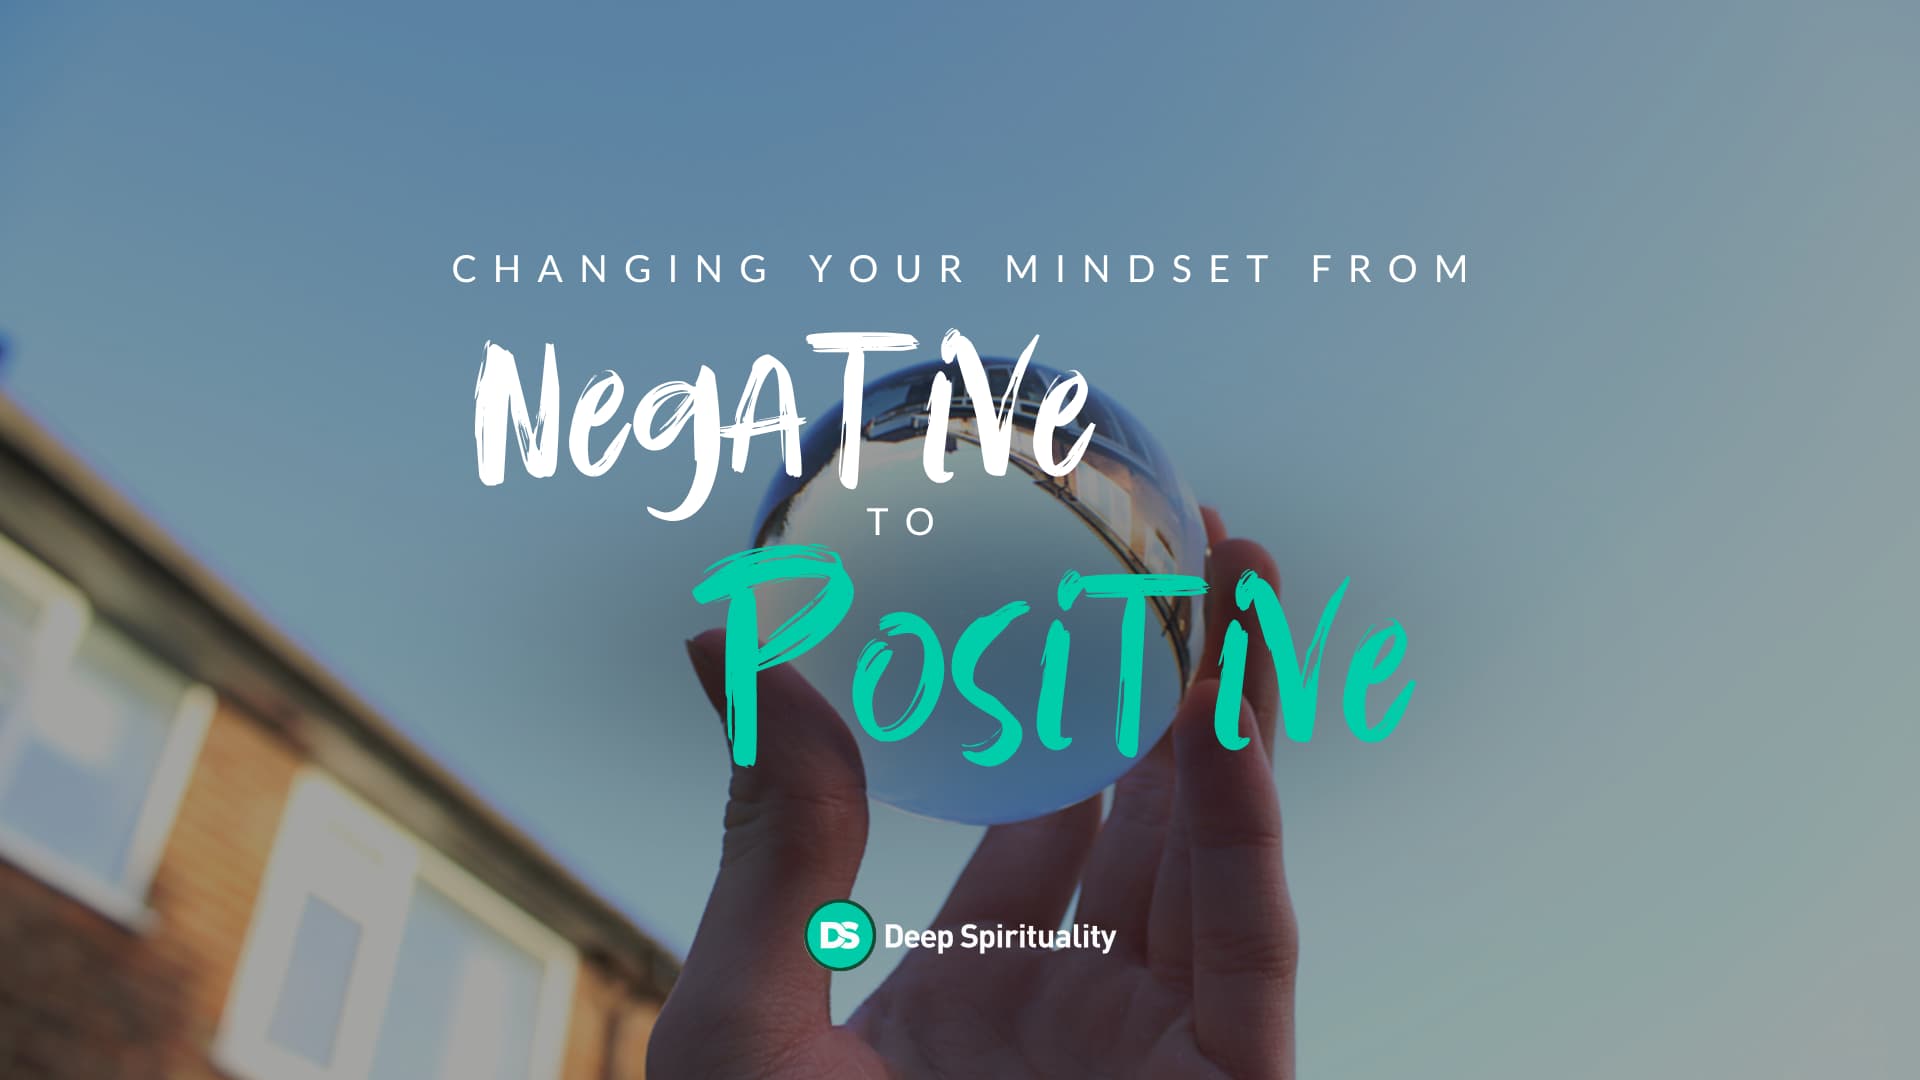 Changing Your Mindset From Negative to Positive  7